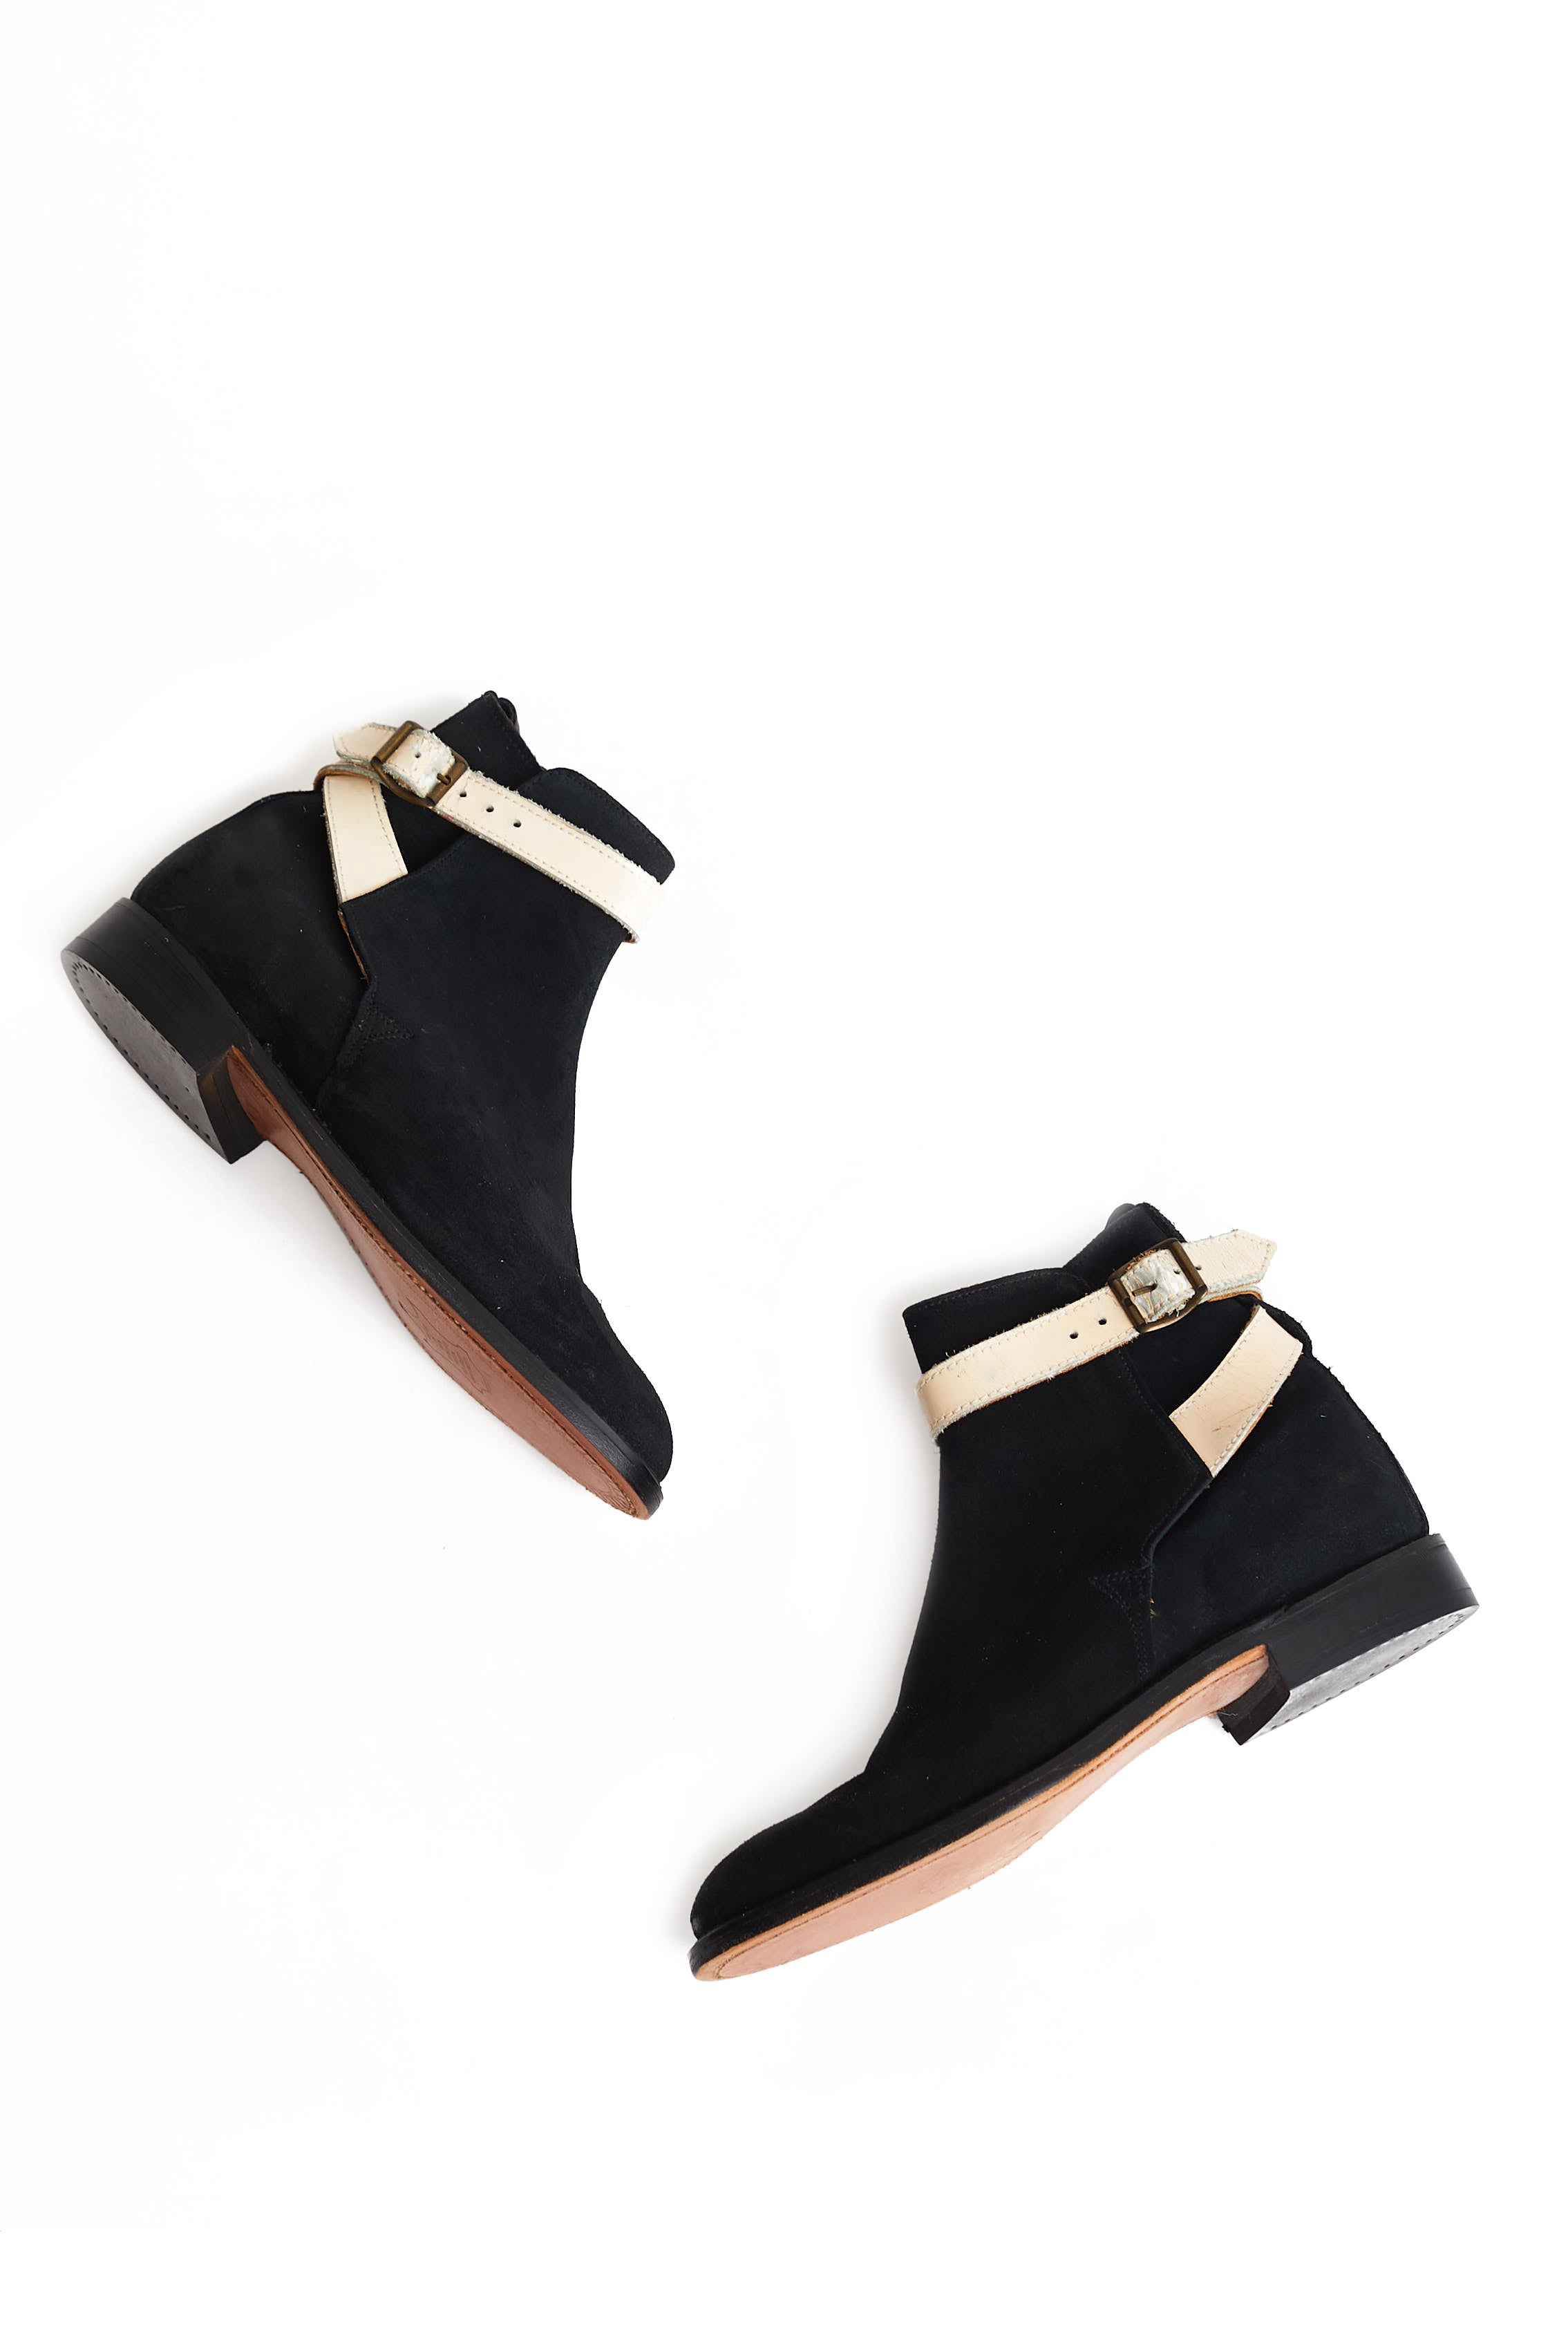 Vivienne Westwood <br> 70's Sex suede Pirate boots